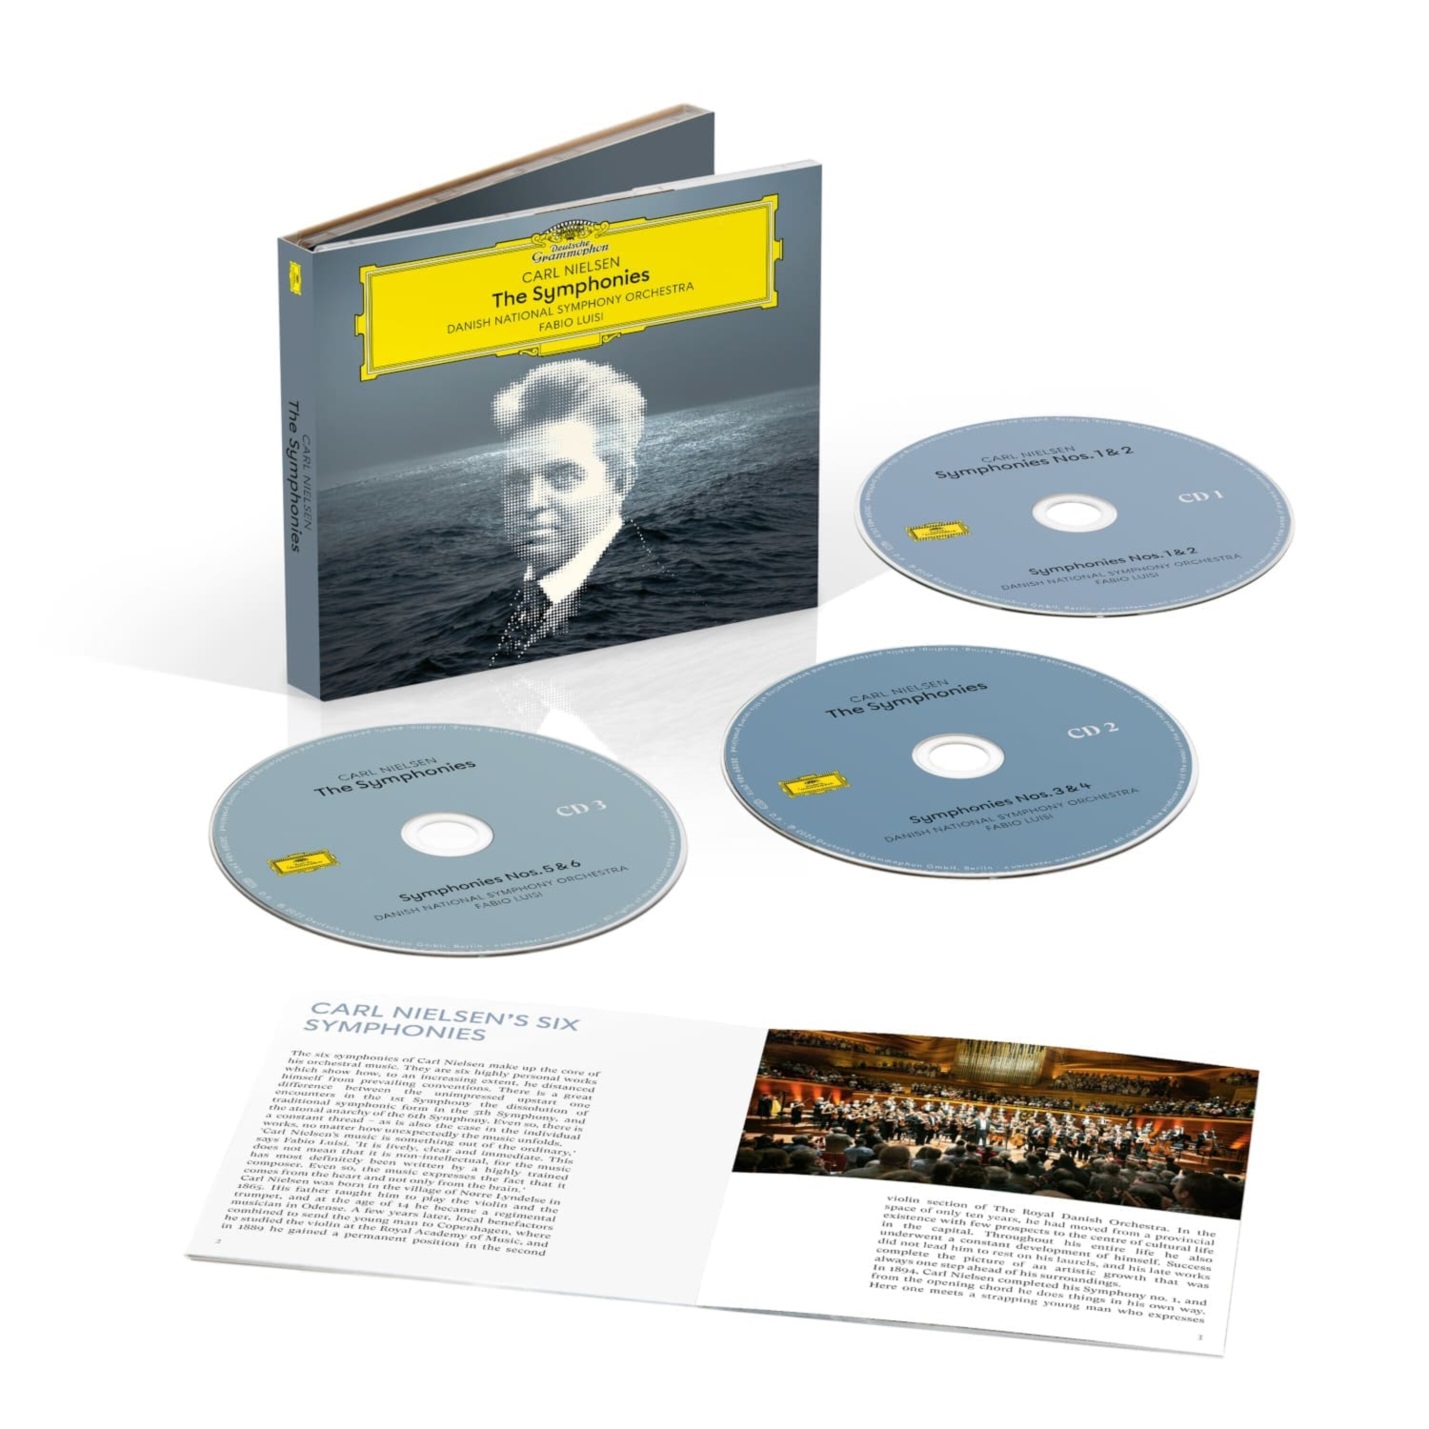 Nielsen Symphonies Nos 1-6 Danish National Symphony Orchestra conducted by Fabio Luisi Deutsche Gramophone Catalogue No: 4863471